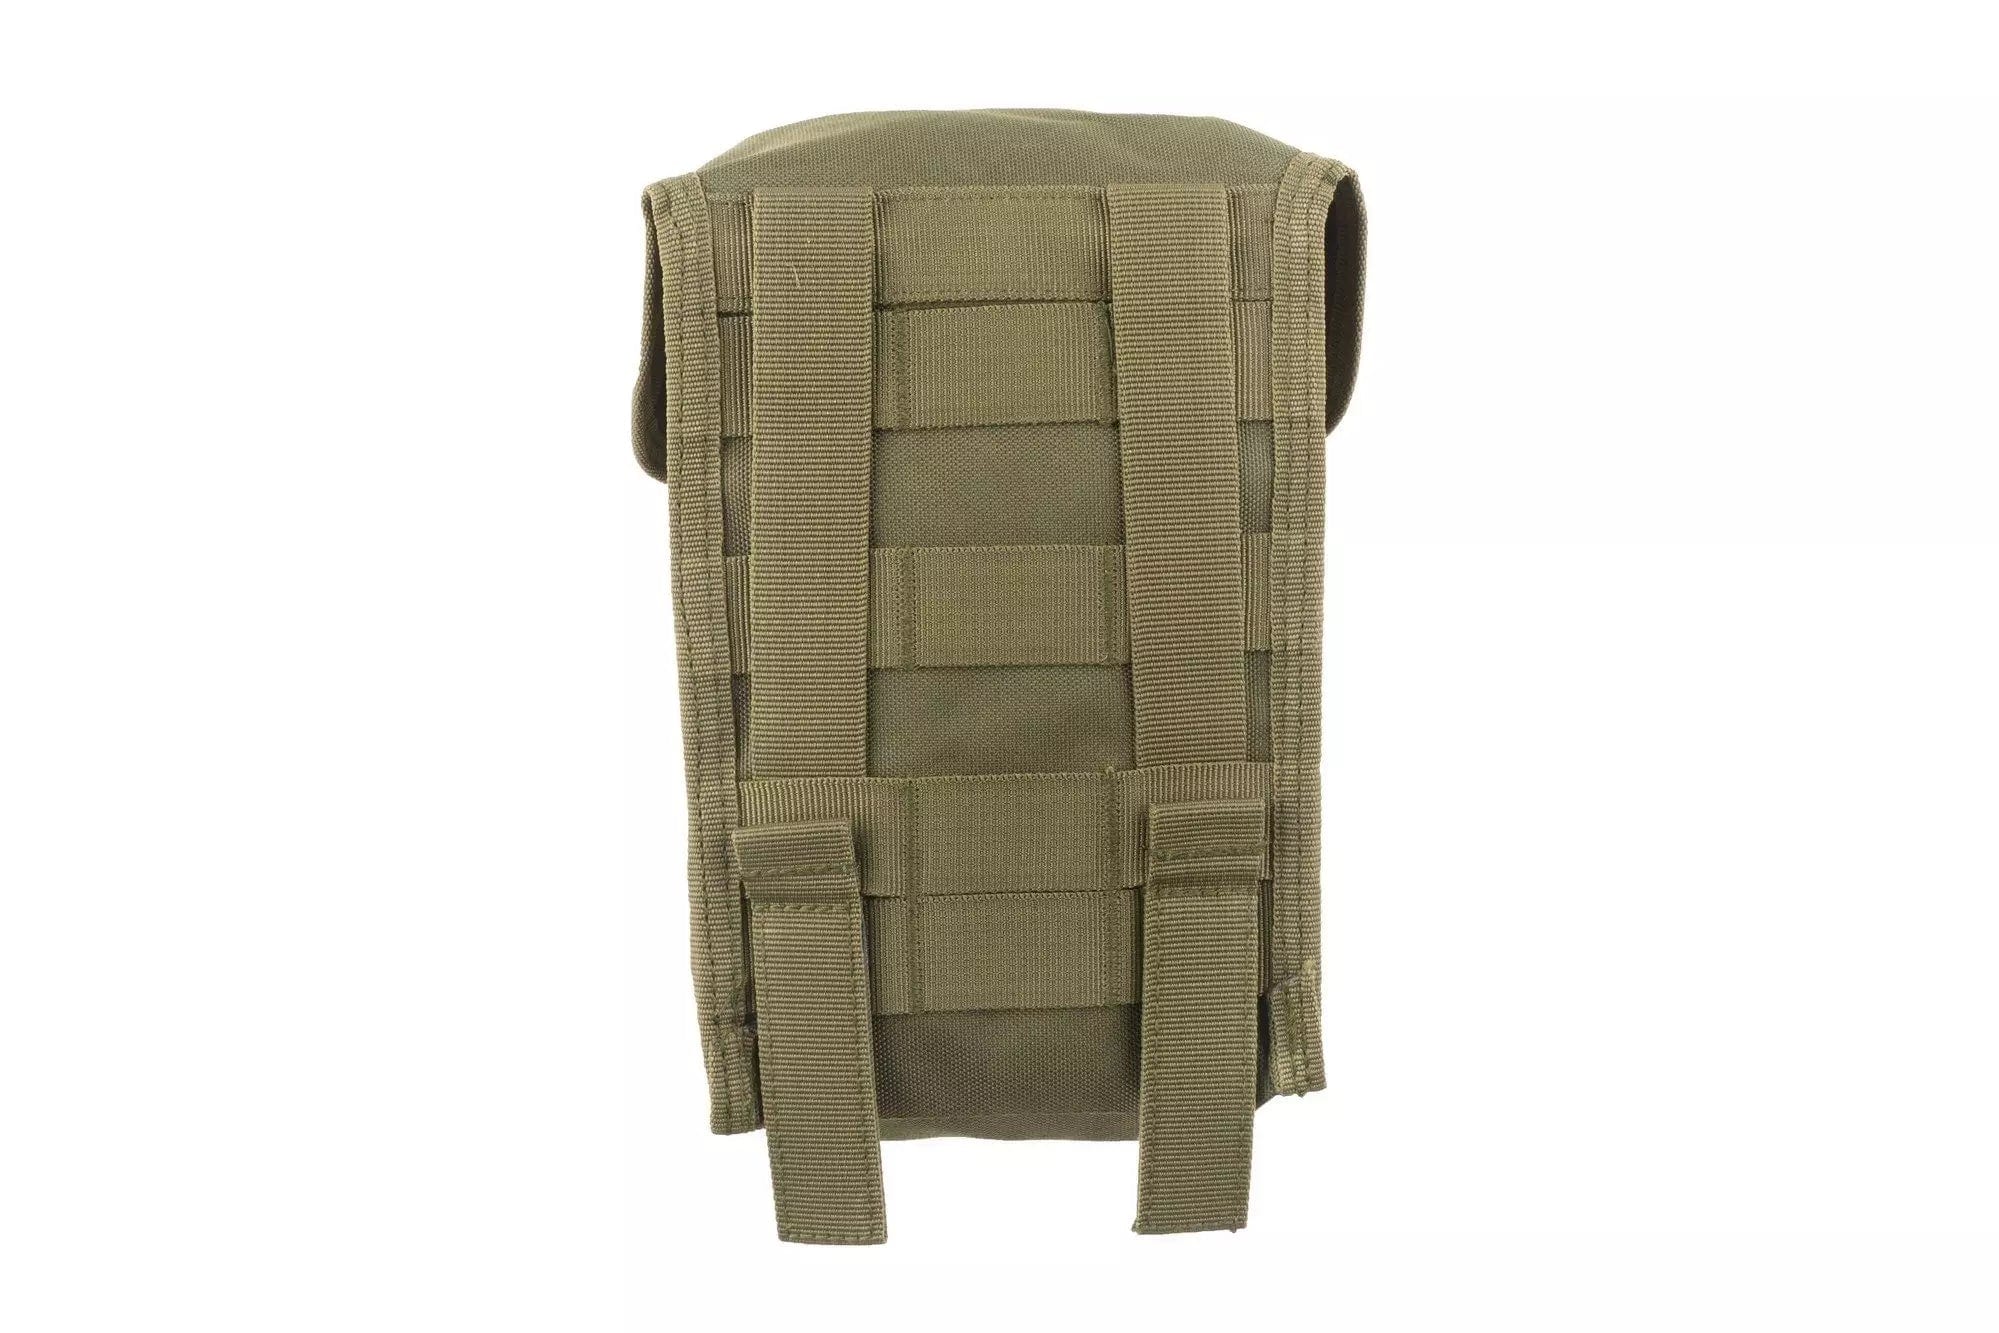 Pouch - Olive Drab